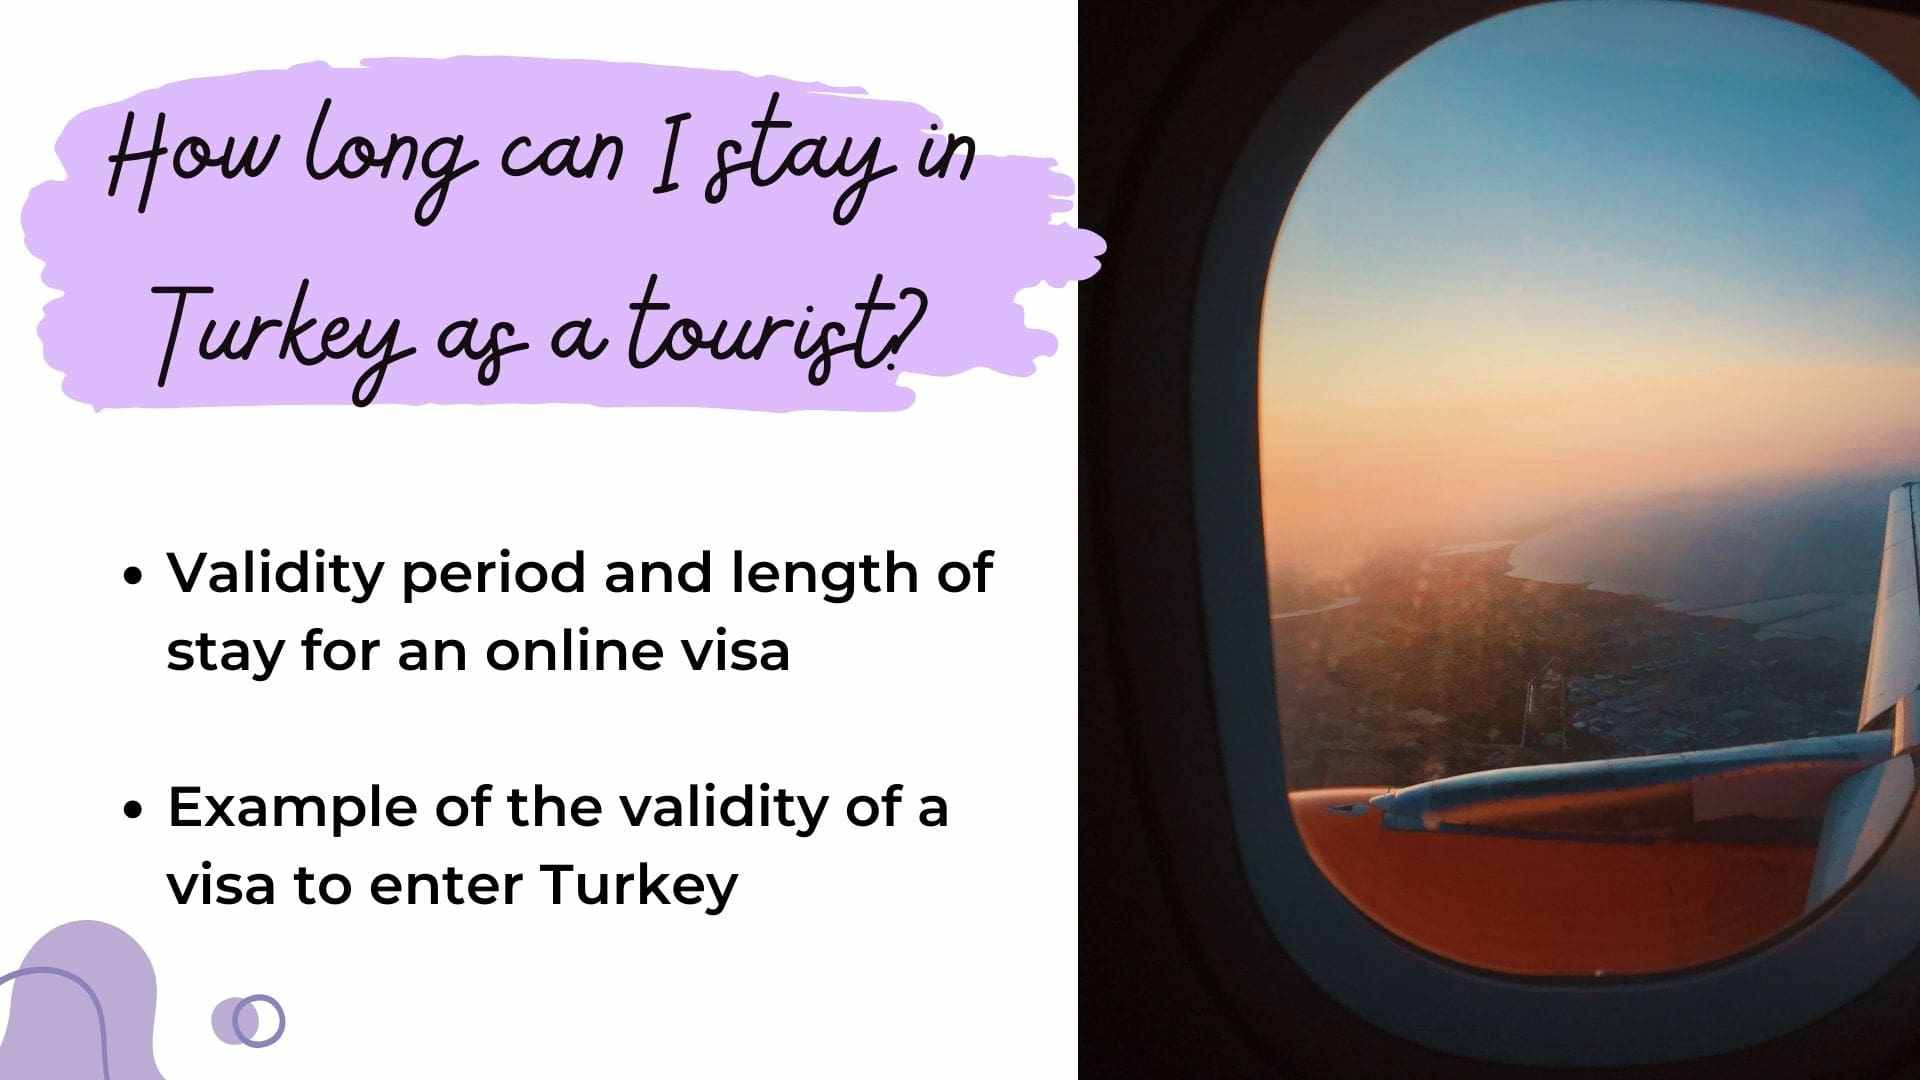 How long can I stay in Turkey as a tourist